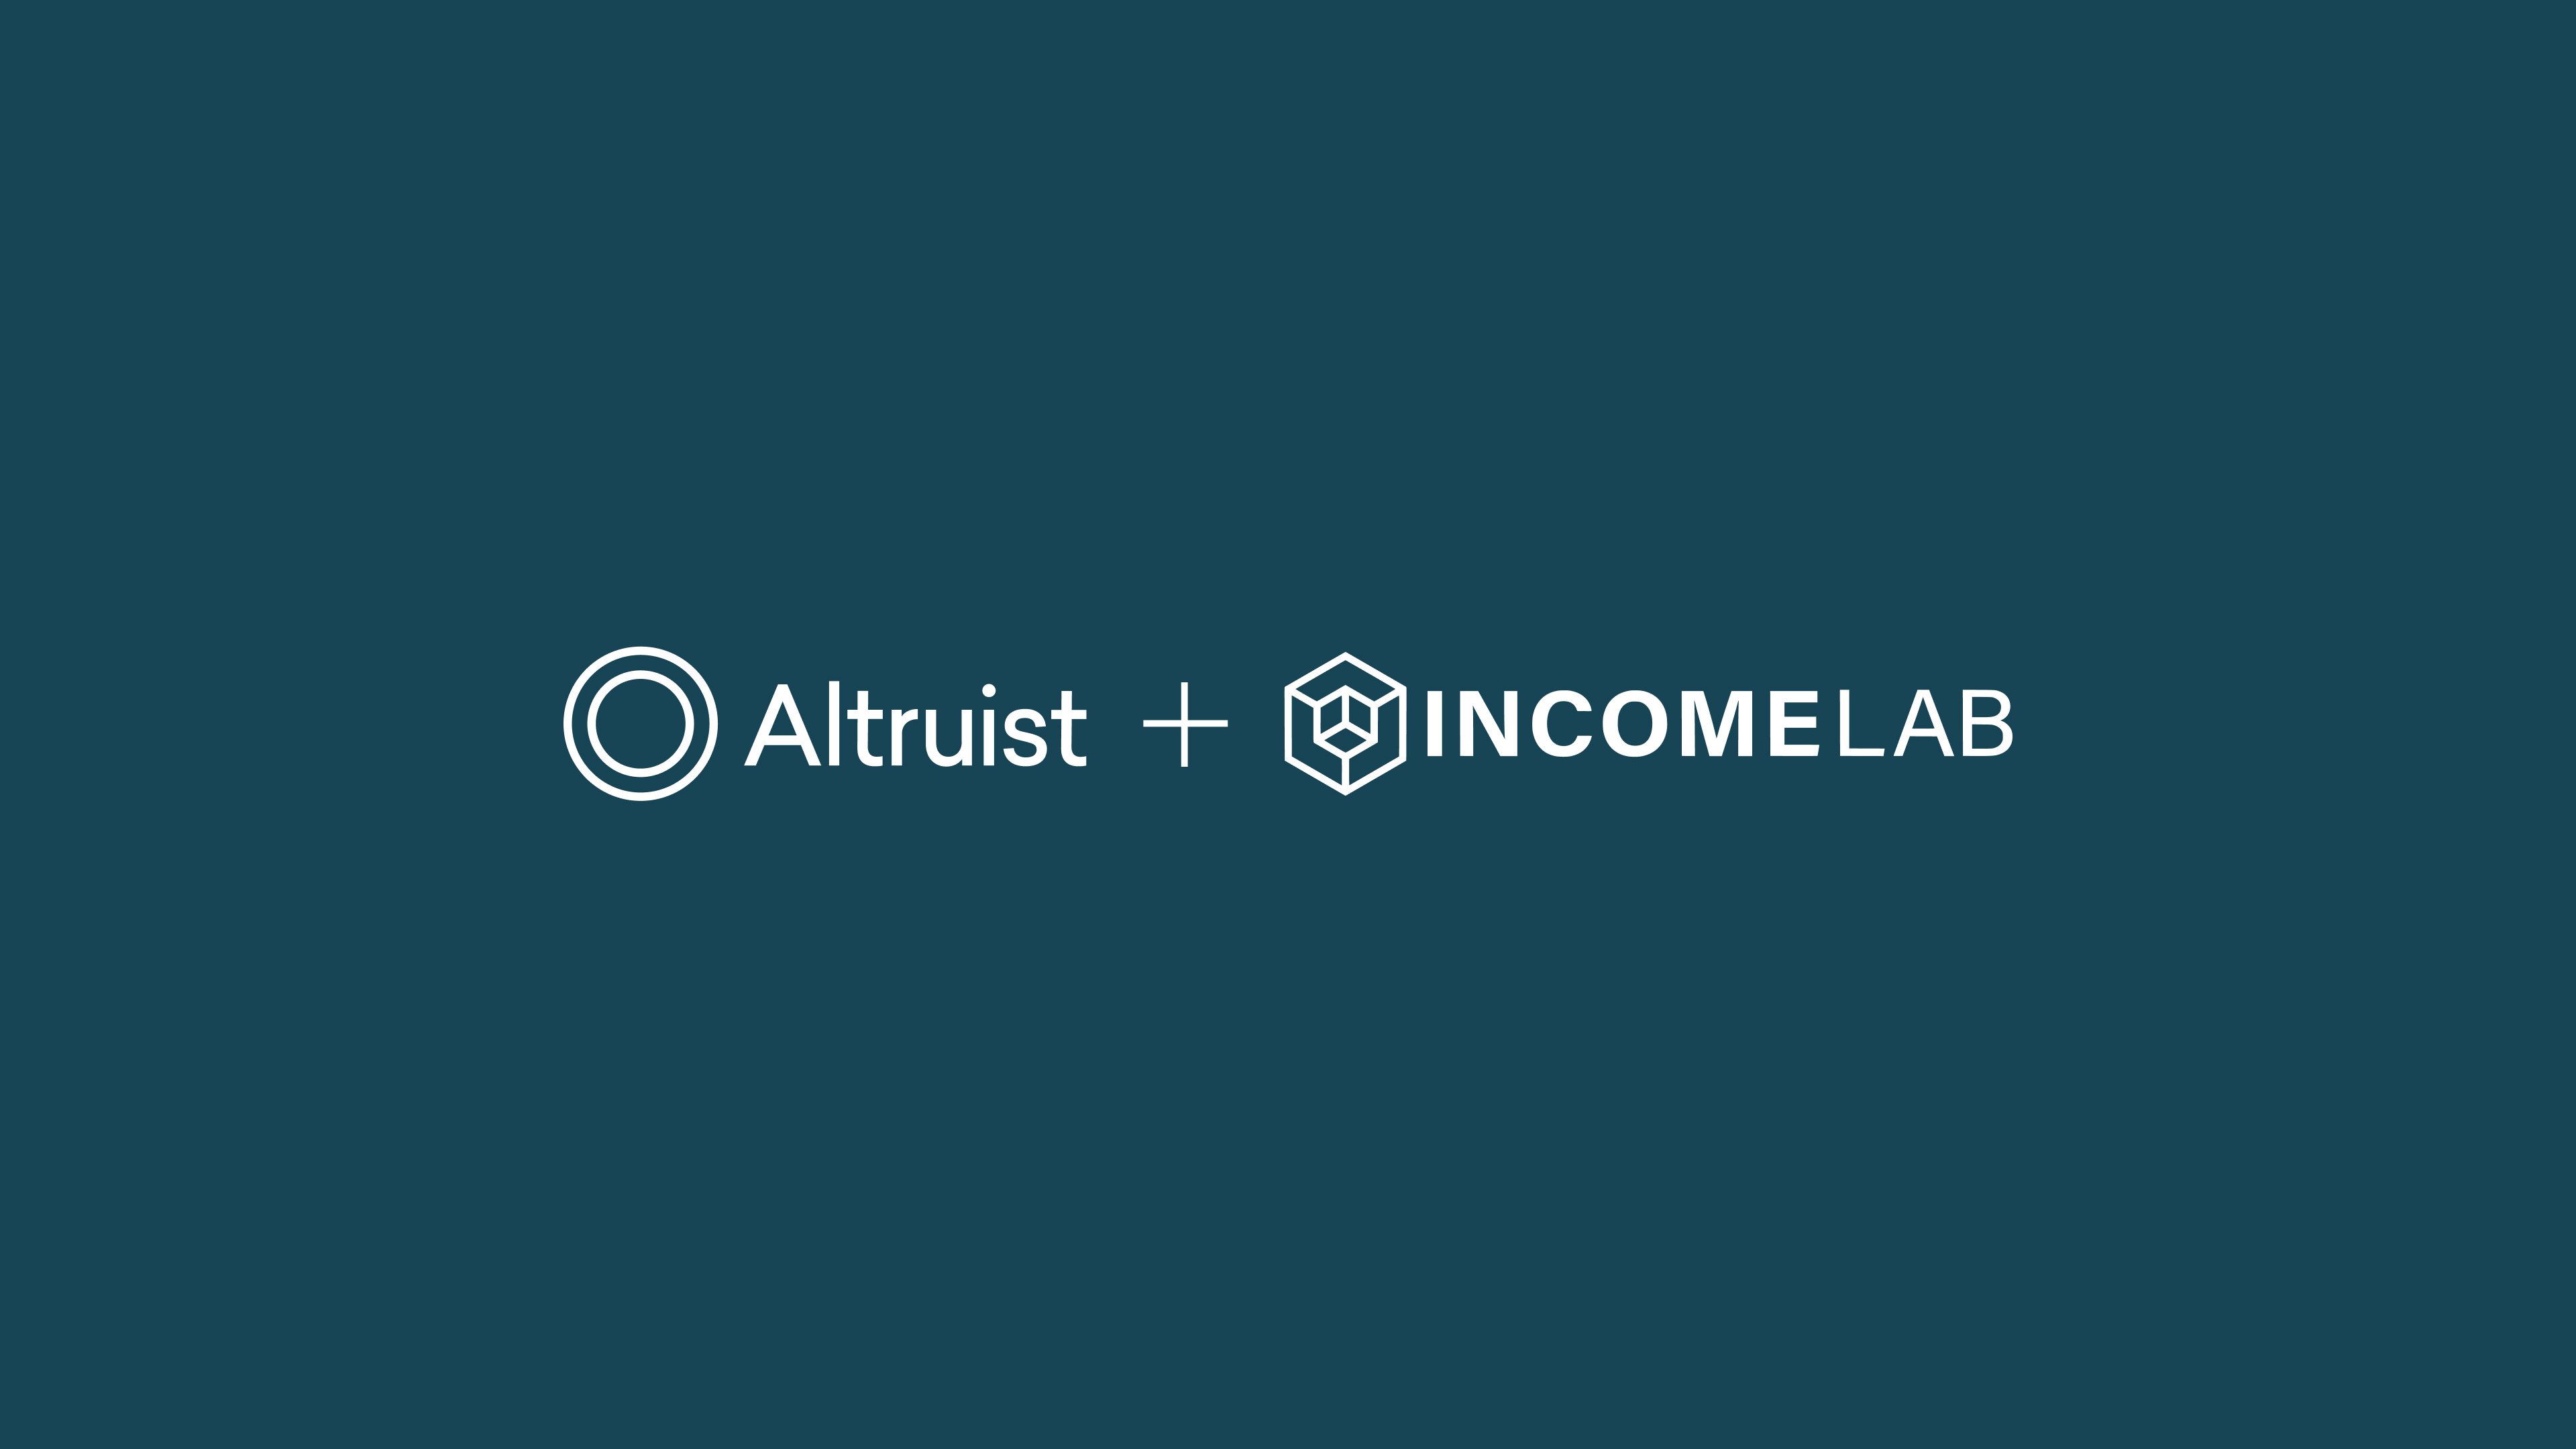 Streamline retirement income planning with Altruist and Income Lab